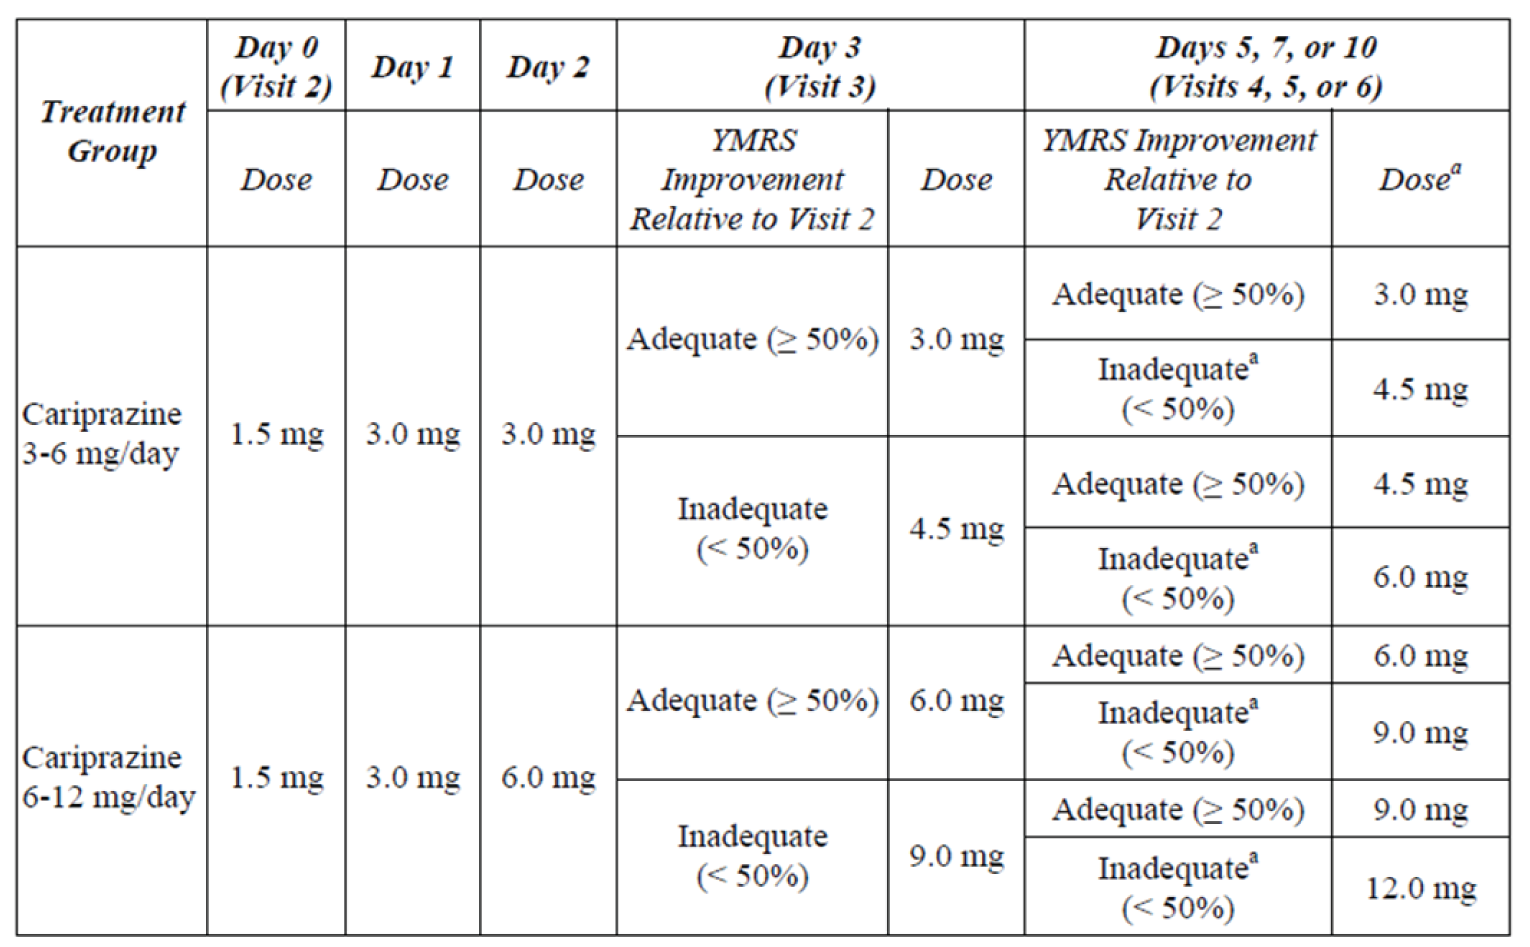 This is a table summarizing the dosing titration schedule for cariprazine 3 mg per day to 6 mg per day and cariprazine 6 mg per day to 12 mg per day. The titration schedule for cariprazine 3 mg per day to 6 mg per day starts with 1.5 mg per day at day 0 and is titrated up to 3 mg per day by day 2. Following day 2, the dose of cariprazine can be titrated up to 6 mg per day based on treatment response.